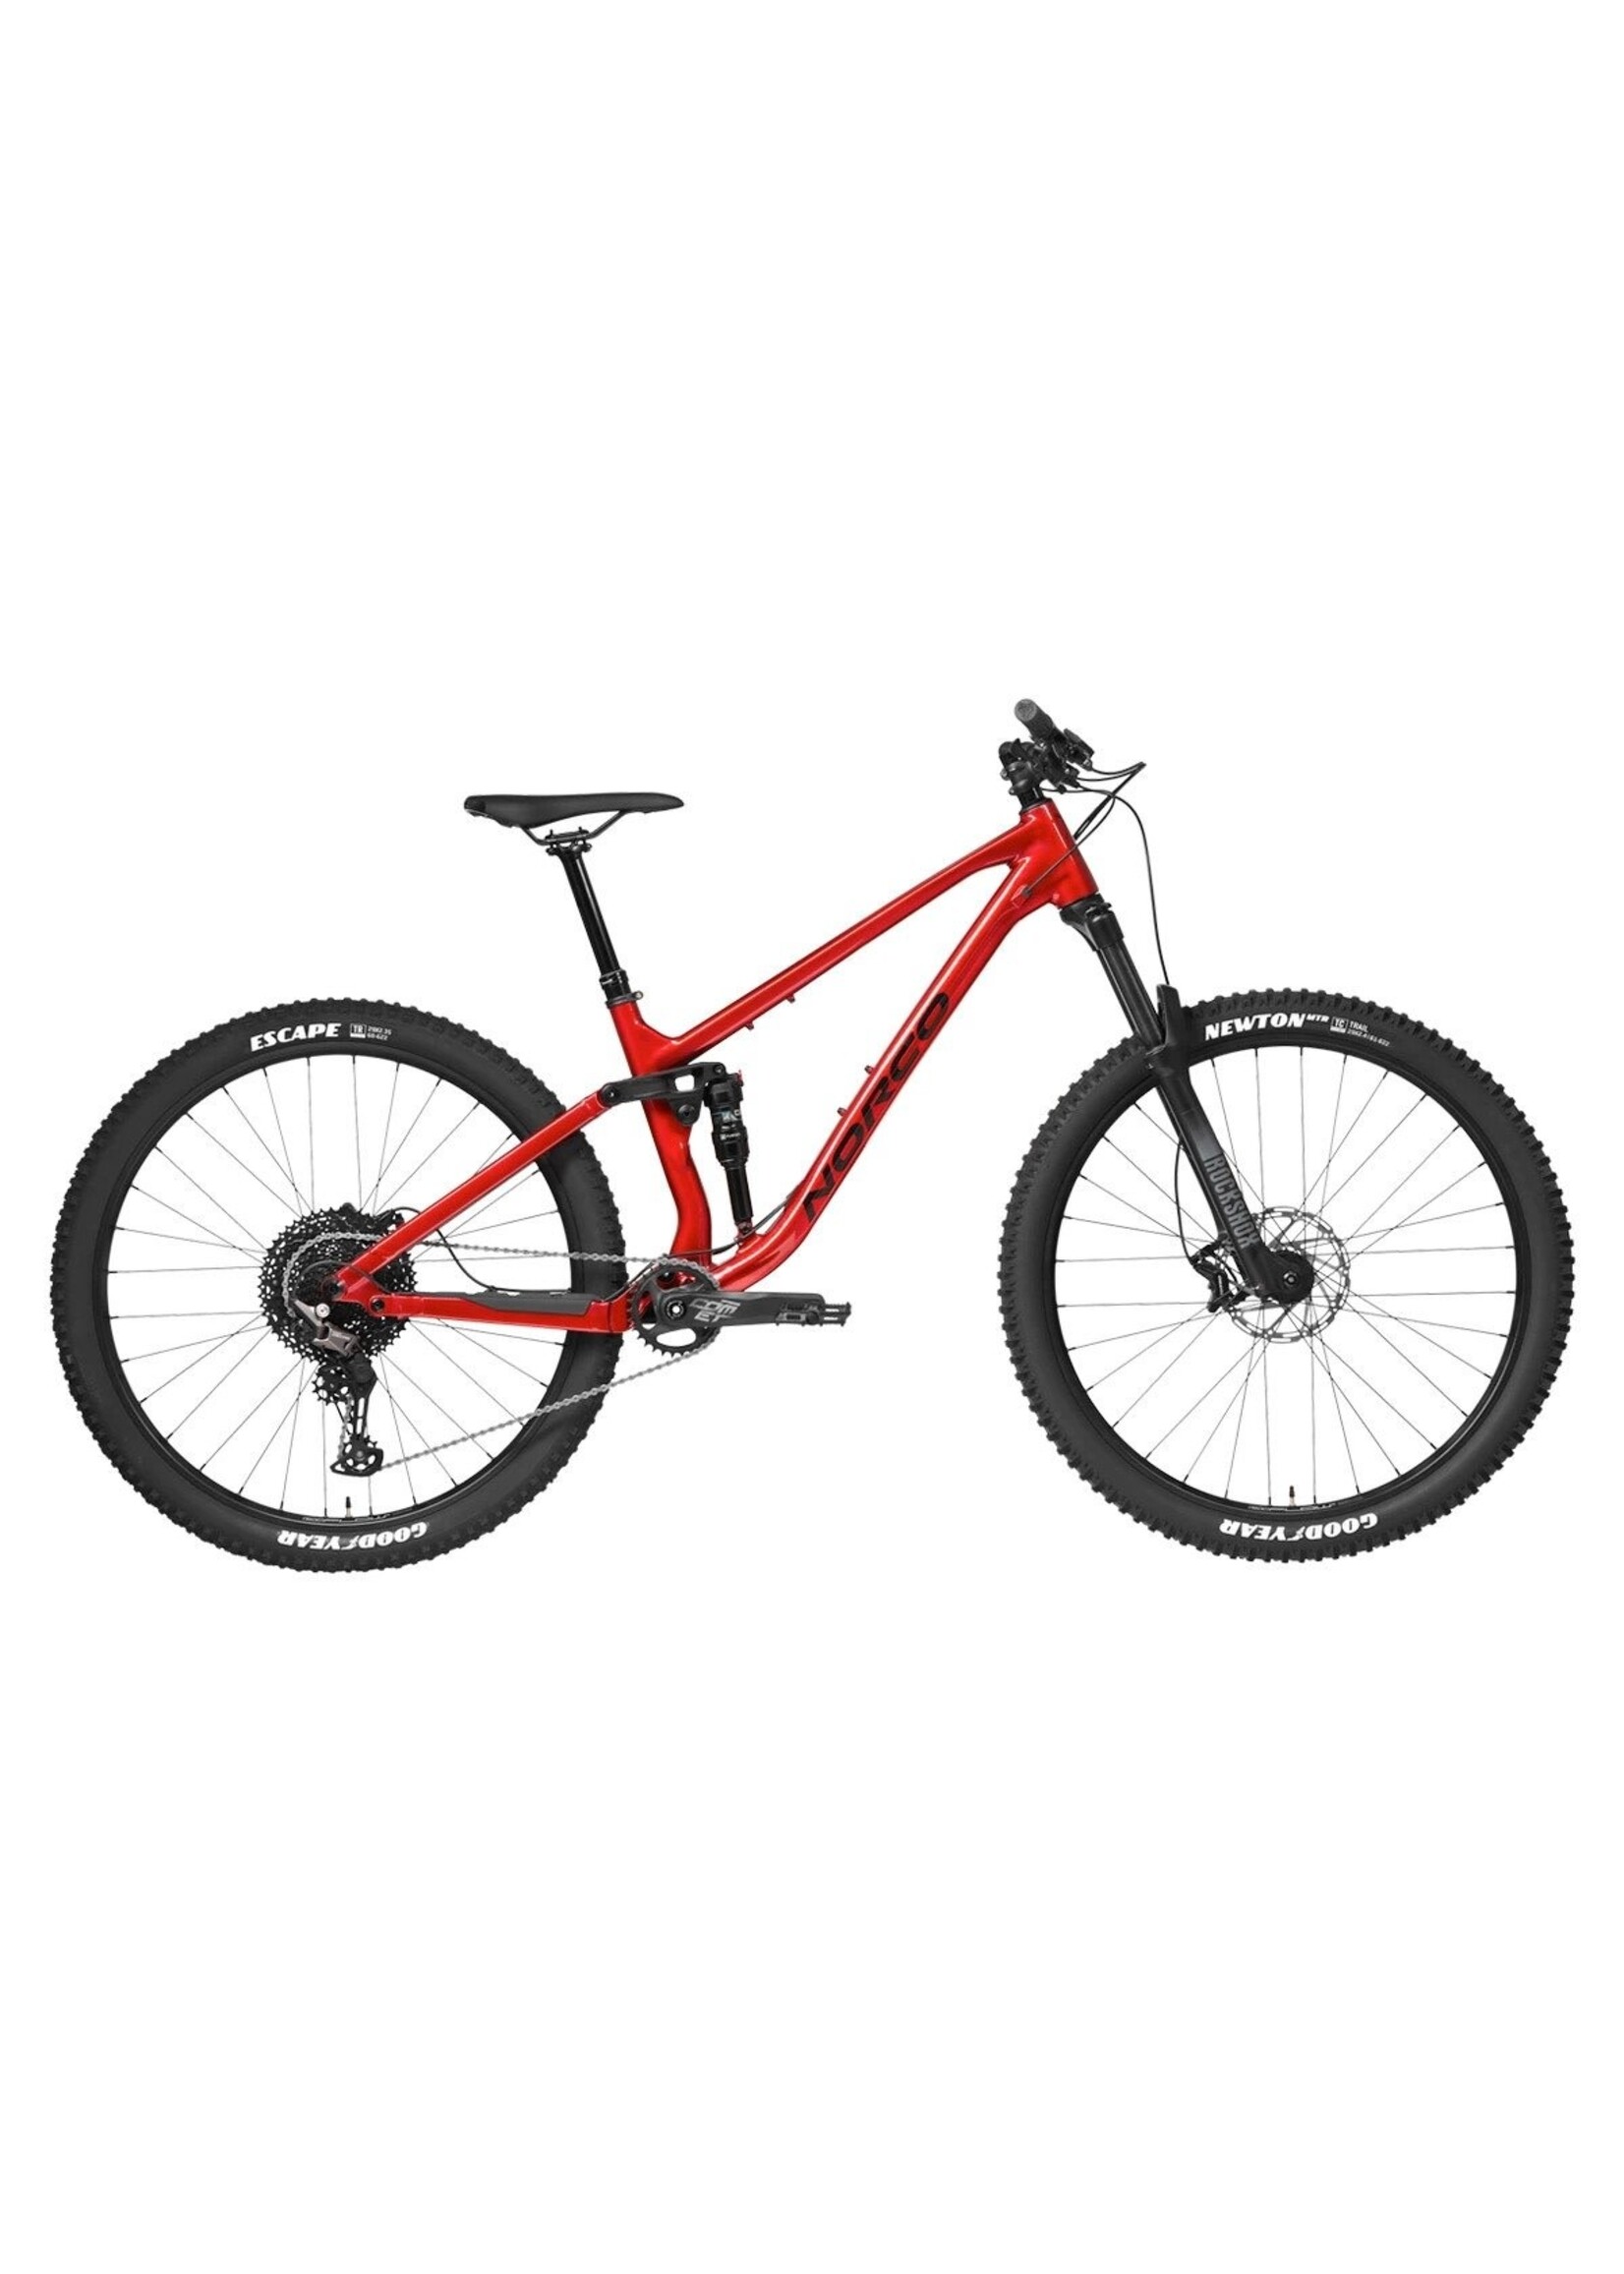 NORCO FLUID FS 4 SMALL 29 RED/BLACK